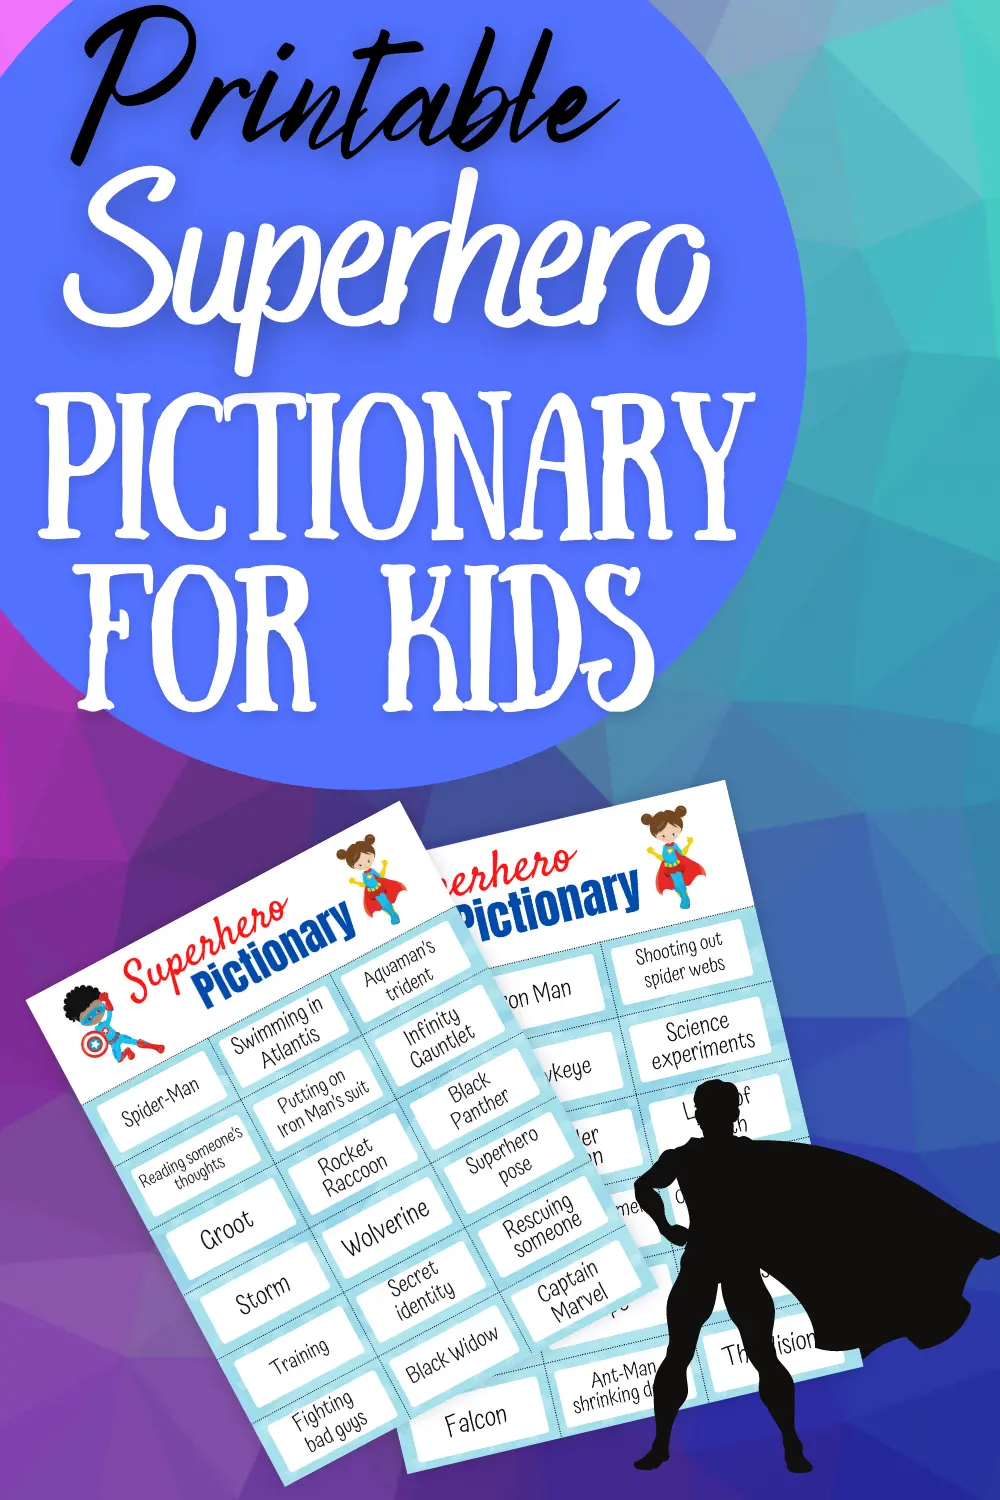 Big blue circle at top with Printable in black text and Superhero Pictionary for Kids in white text. Preview image of two printable pages on a multi-colored textured background with the silhouette of a person wearing a cape in the lower right hand corner.